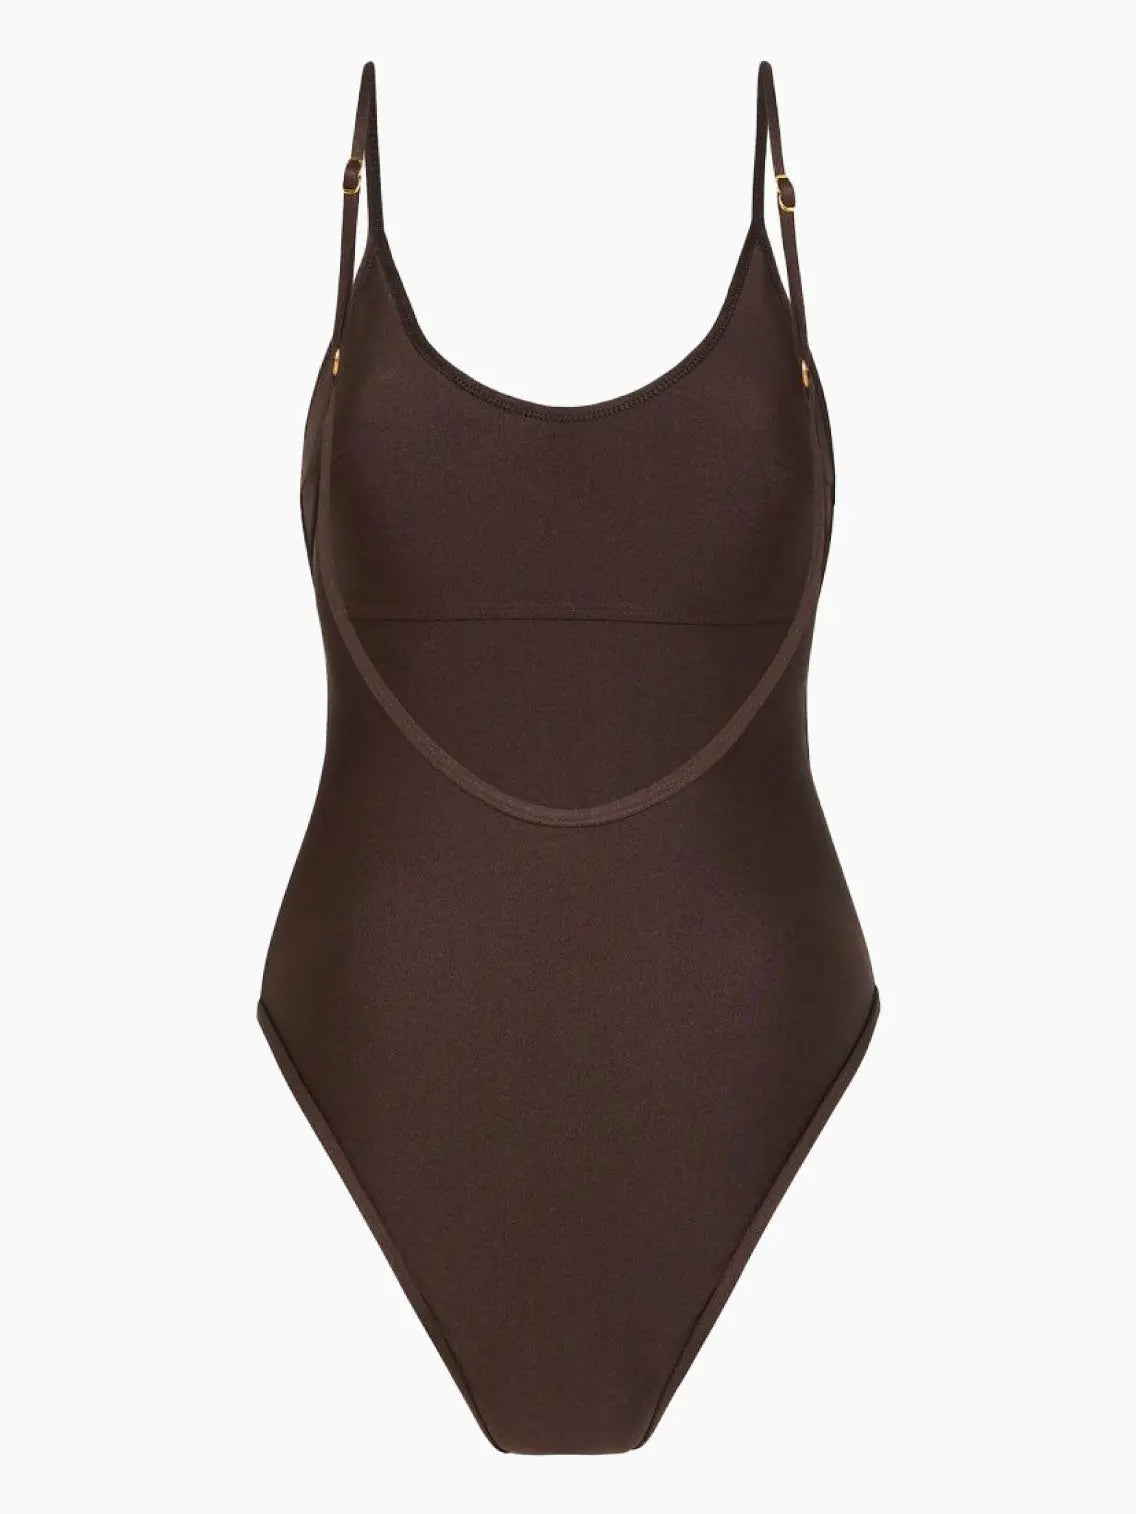 A brown, one-piece swimsuit with thin, adjustable straps and a high-cut leg available at BassalStore in Barcelona. The Chocolate Scoop One Piece Swimwear by Innes Lauren features a smooth, seamless design and rounded neckline.